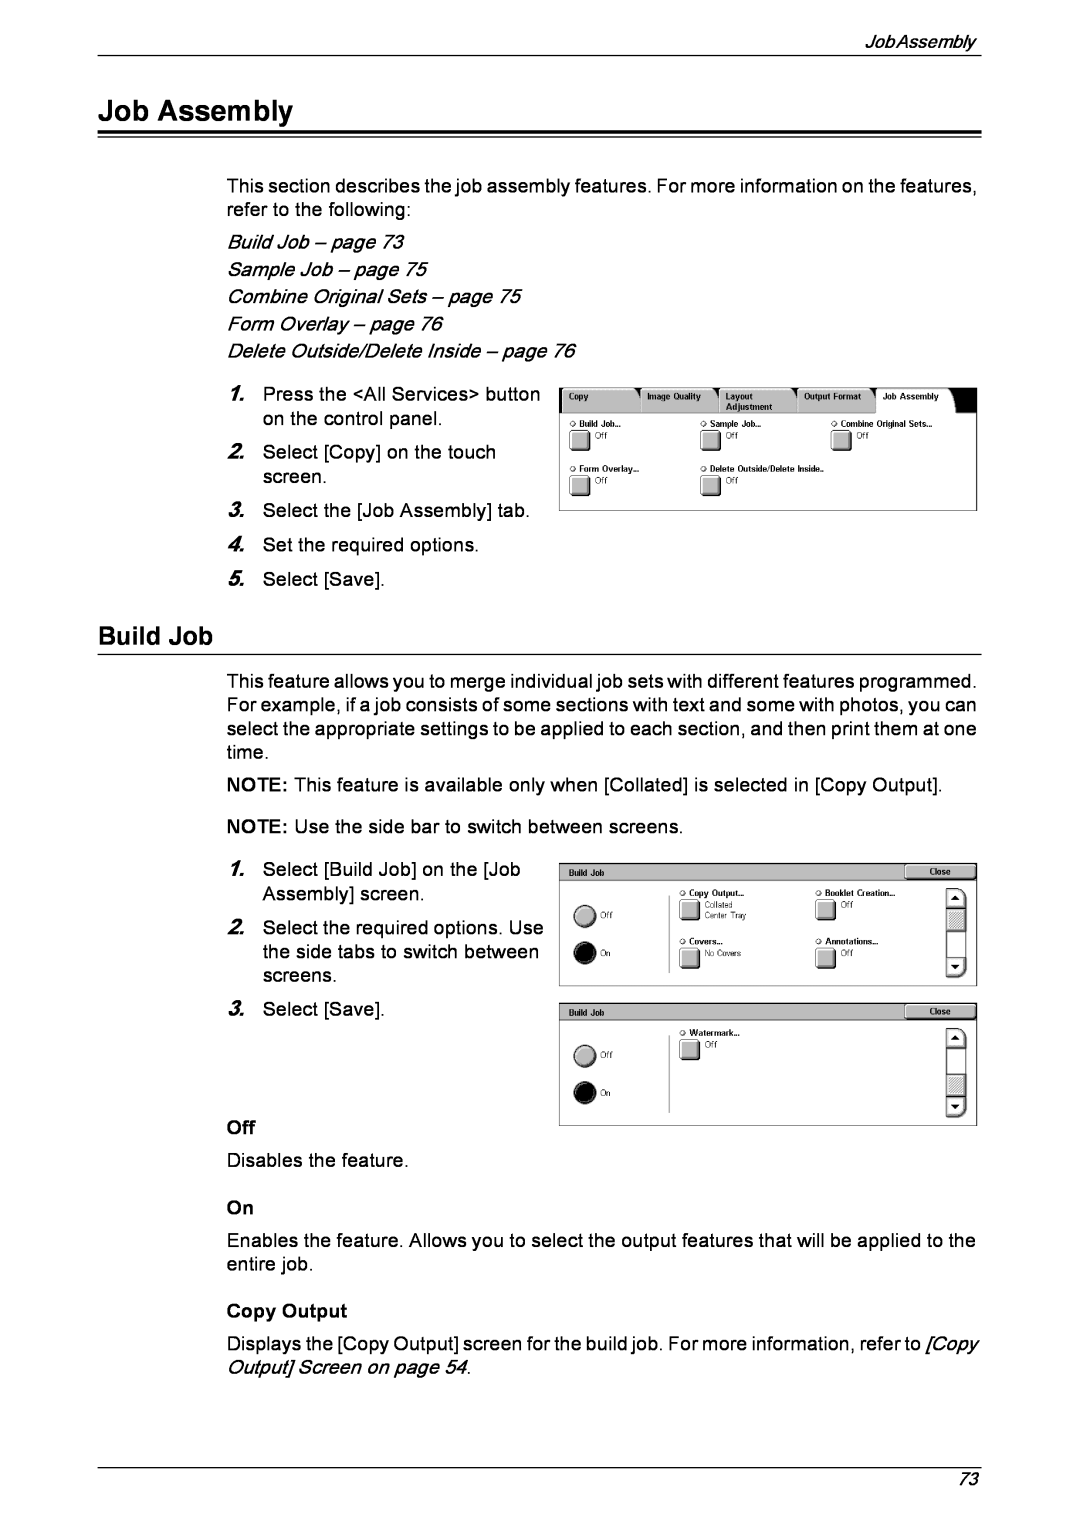 Xerox 5230 manual Job Assembly, Build Job – page Sample Job – page, Combine Original Sets – page Form Overlay – page 